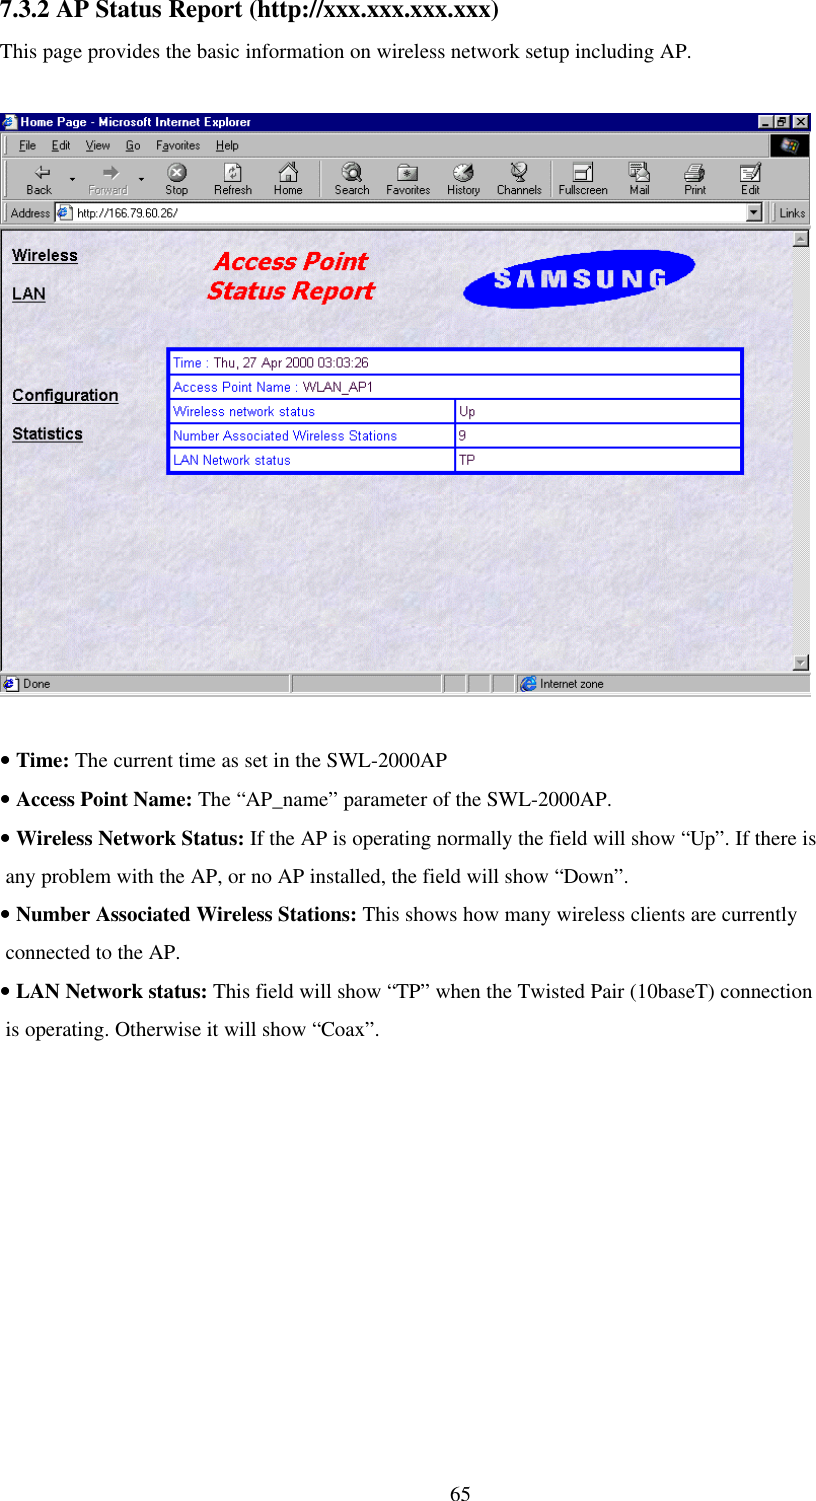 657.3.2 AP Status Report (http://xxx.xxx.xxx.xxx)This page provides the basic information on wireless network setup including AP.•• Time: The current time as set in the SWL-2000AP•• Access Point Name: The “AP_name” parameter of the SWL-2000AP.•• Wireless Network Status: If the AP is operating normally the field will show “Up”. If there is any problem with the AP, or no AP installed, the field will show “Down”.•• Number Associated Wireless Stations: This shows how many wireless clients are currently connected to the AP.•• LAN Network status: This field will show “TP” when the Twisted Pair (10baseT) connection is operating. Otherwise it will show “Coax”.